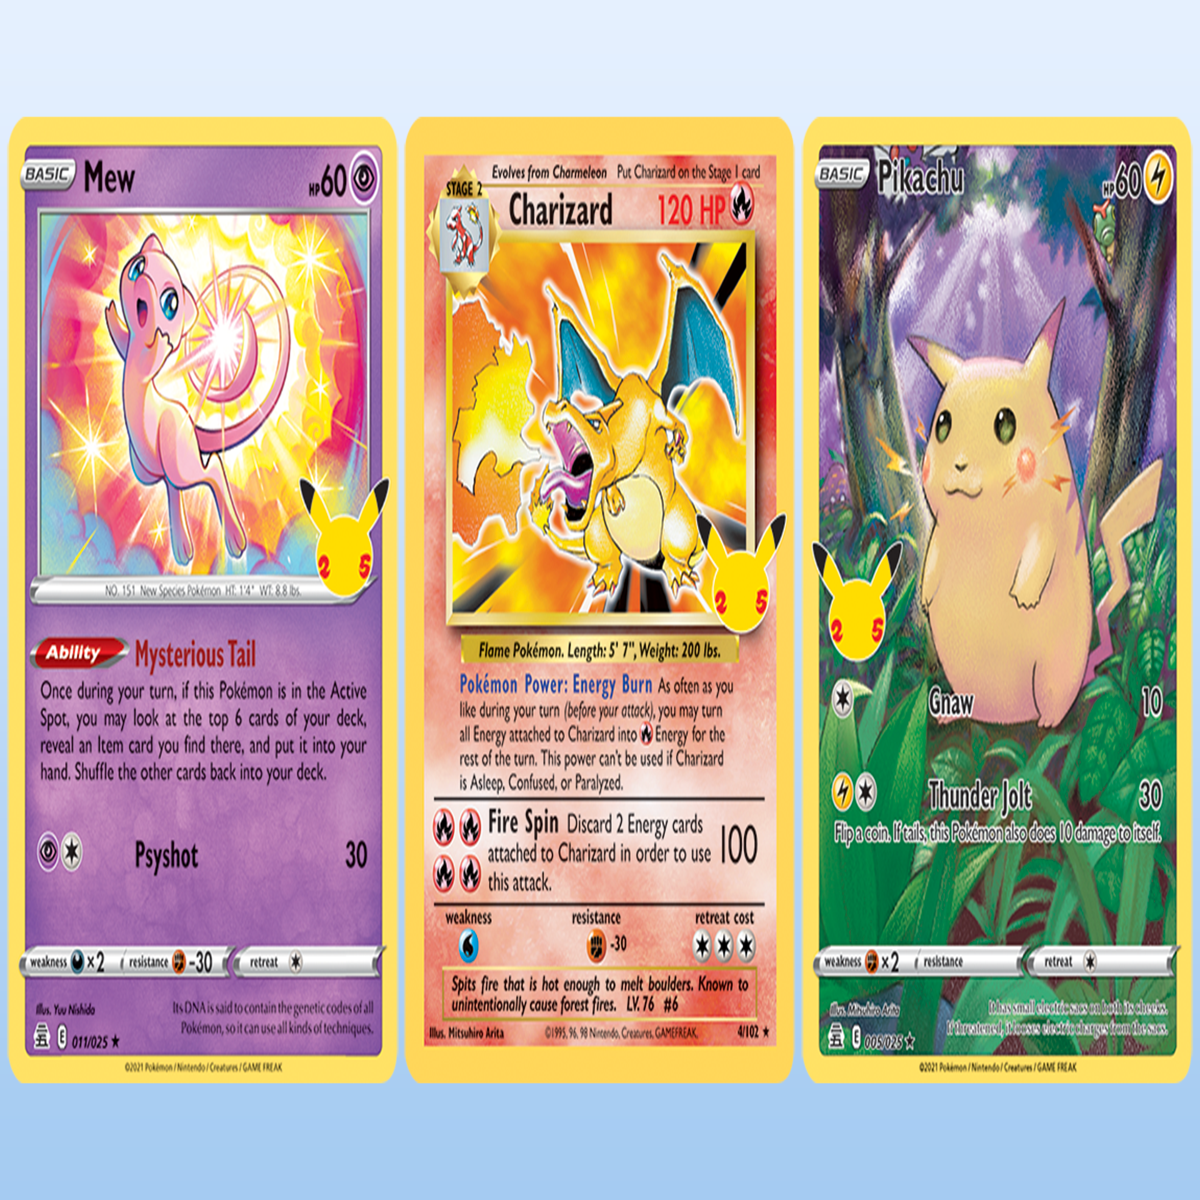 First Edition Pokémon Trading Cards Are Getting A Reprint For The